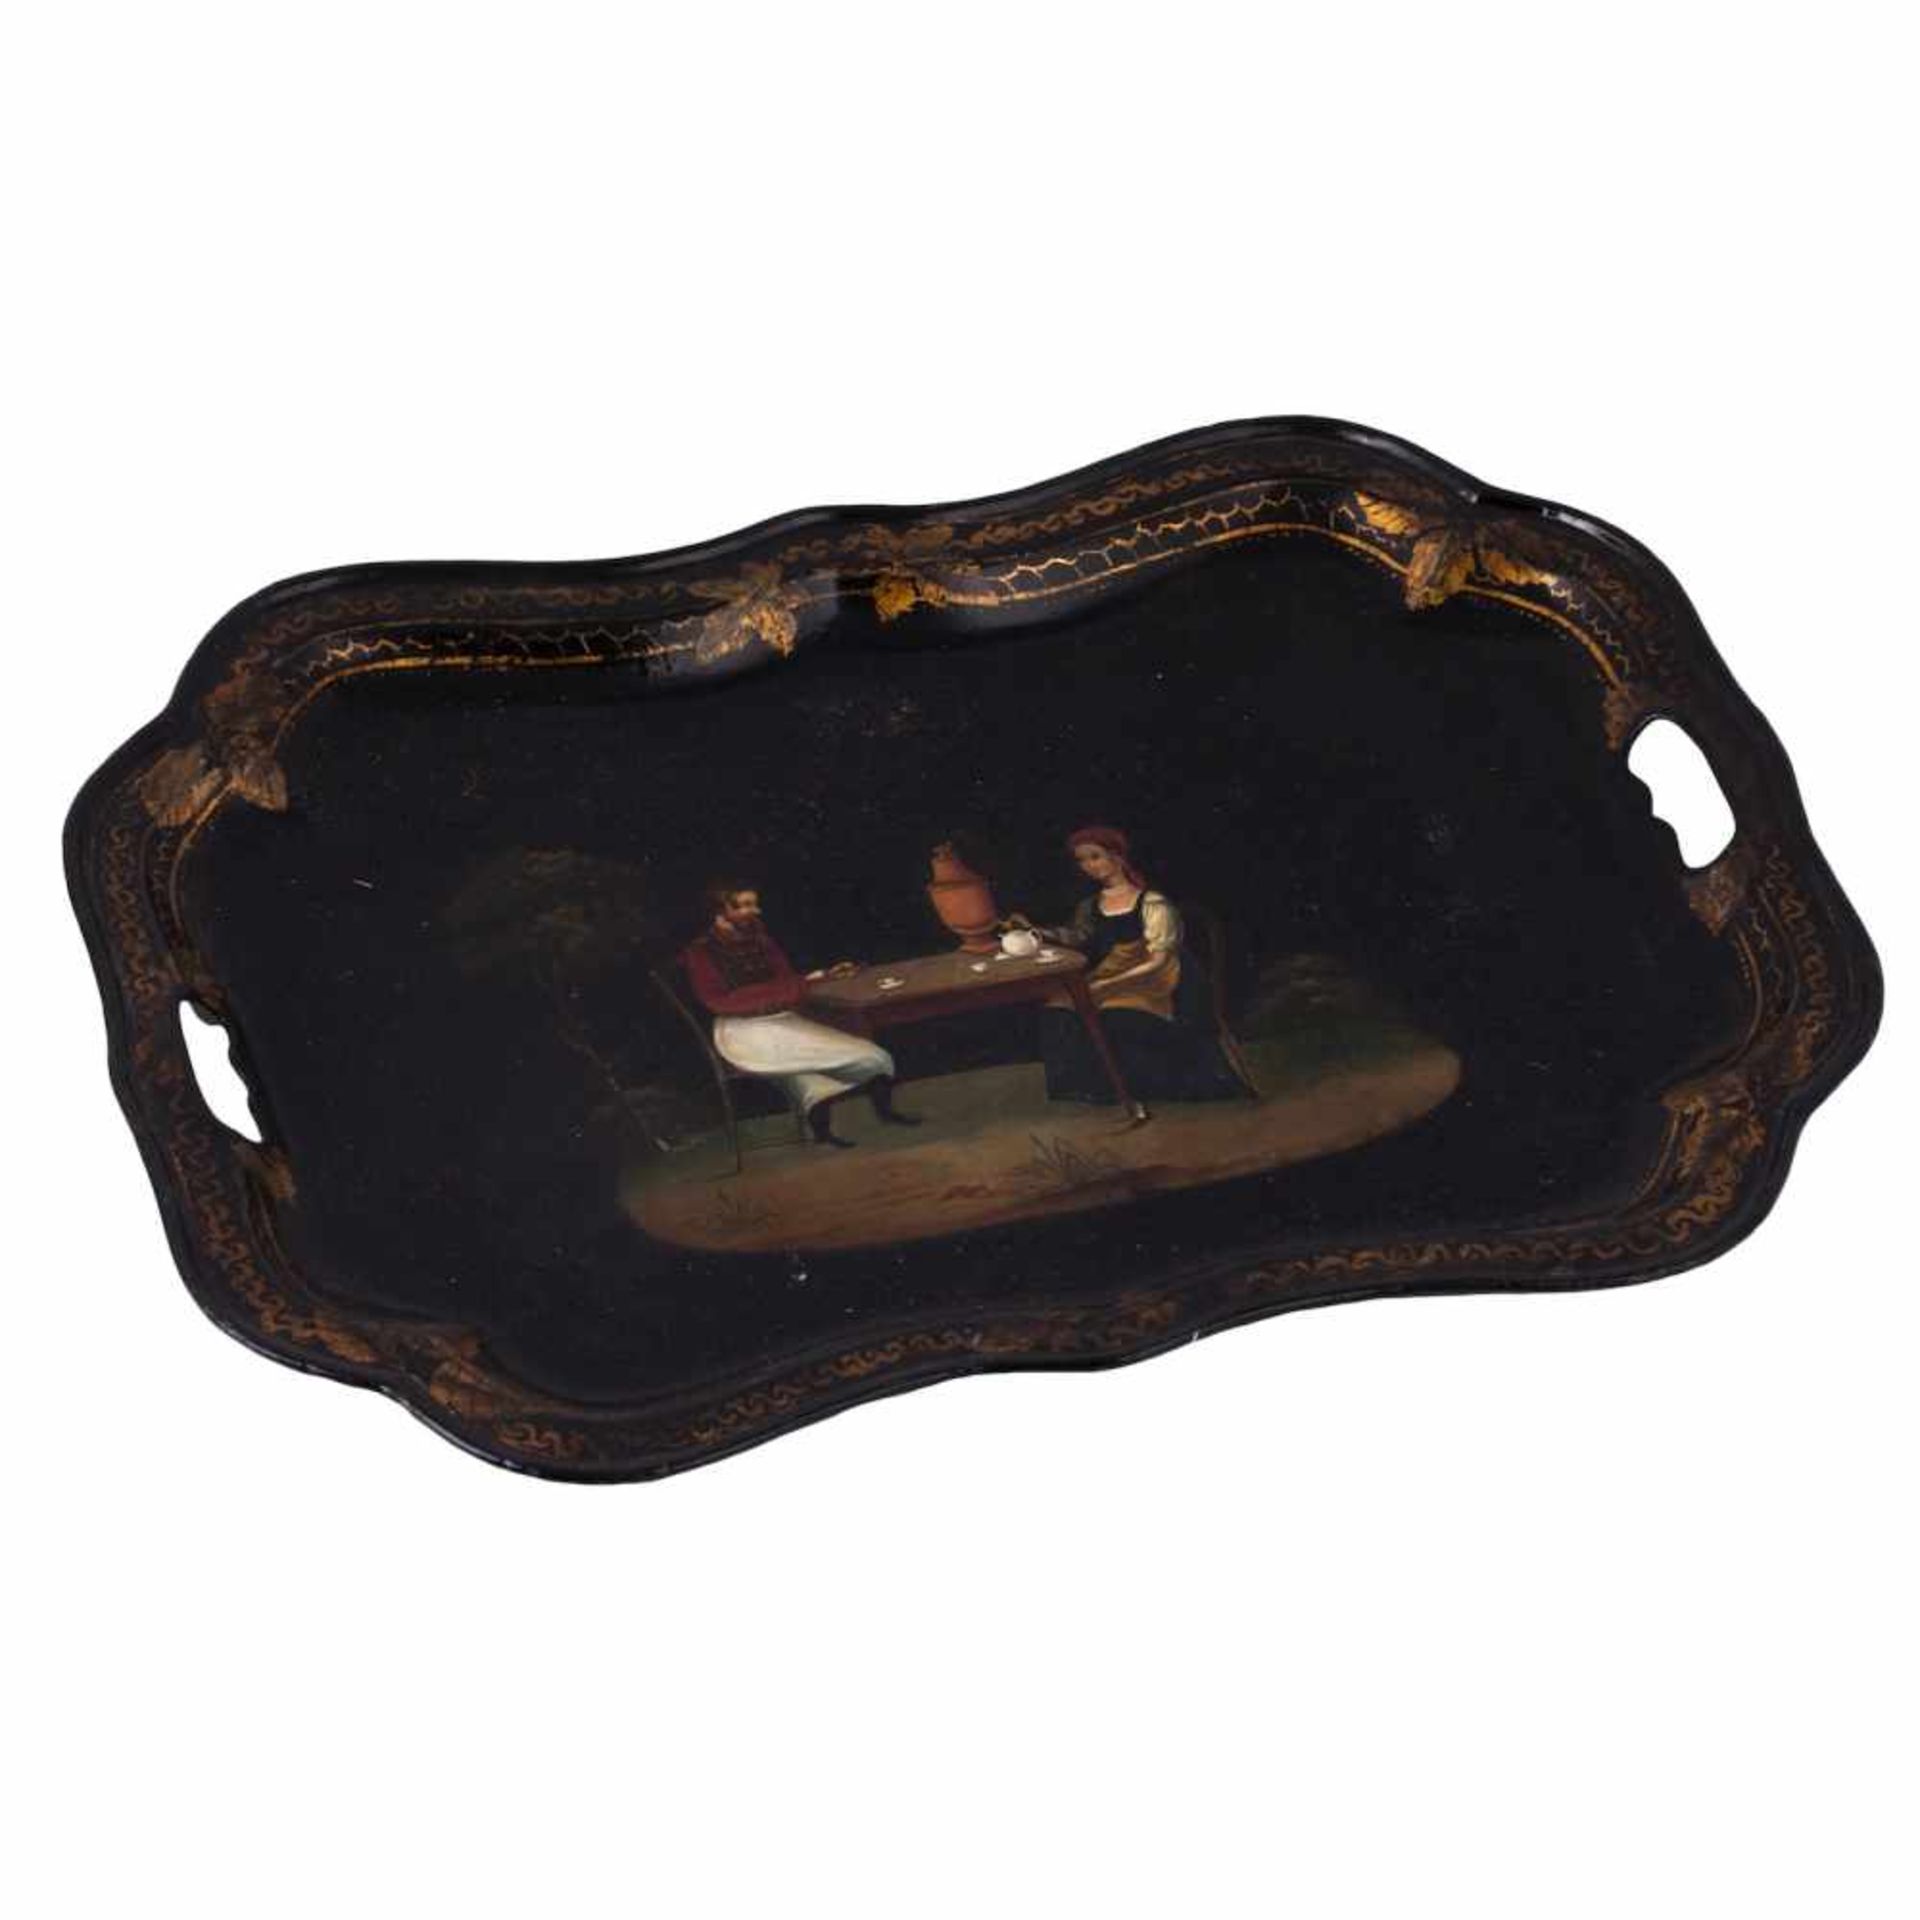 Russian tray with a painted tea drinking sceneRussian tray with a painted tea drinking scene. - Image 3 of 4